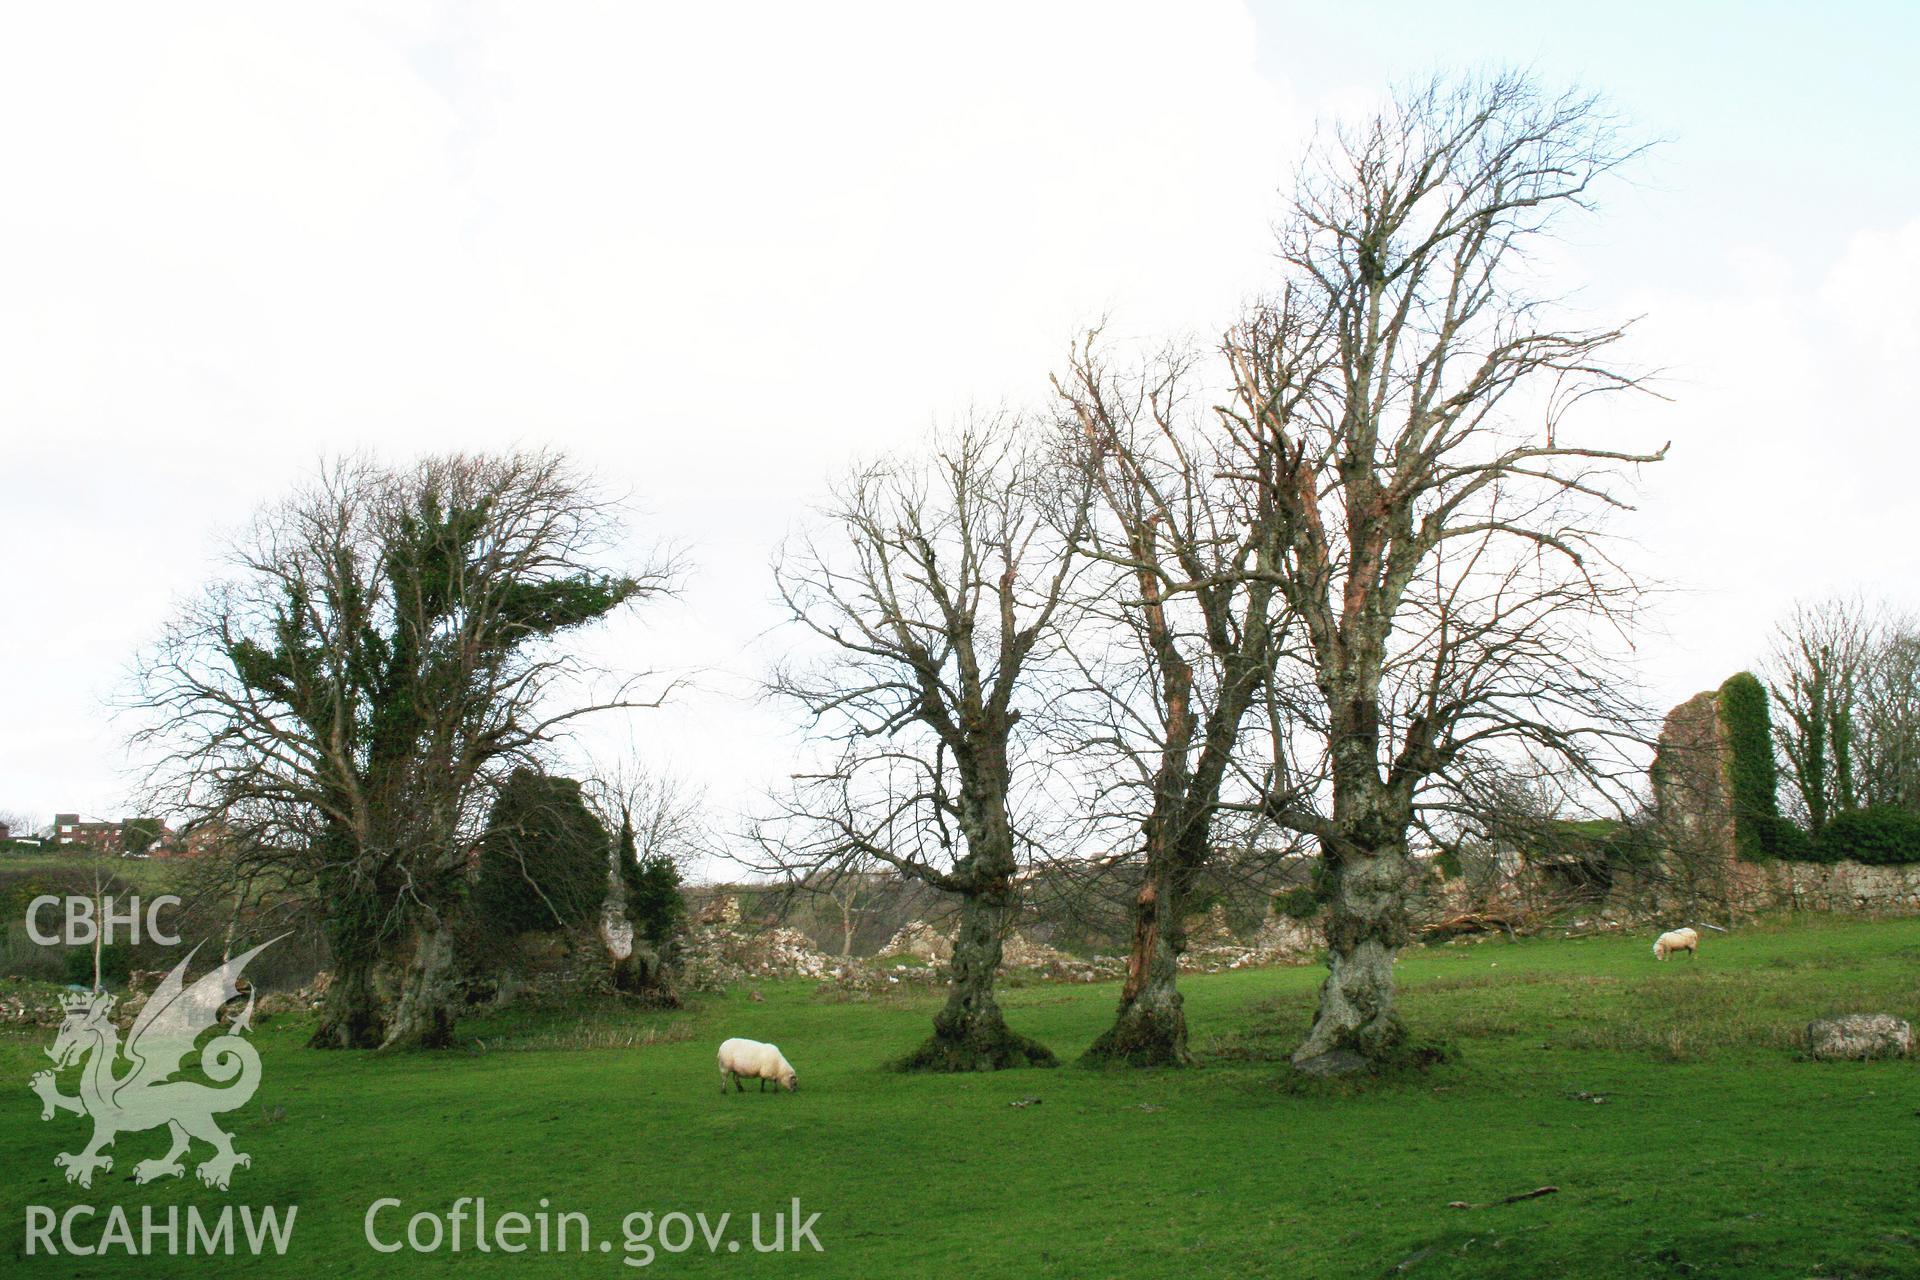 The remains of Haroldstone House and the Lime Avenue from the south, showing the medieval hall with the inner courtyard and gatehouse to the right.